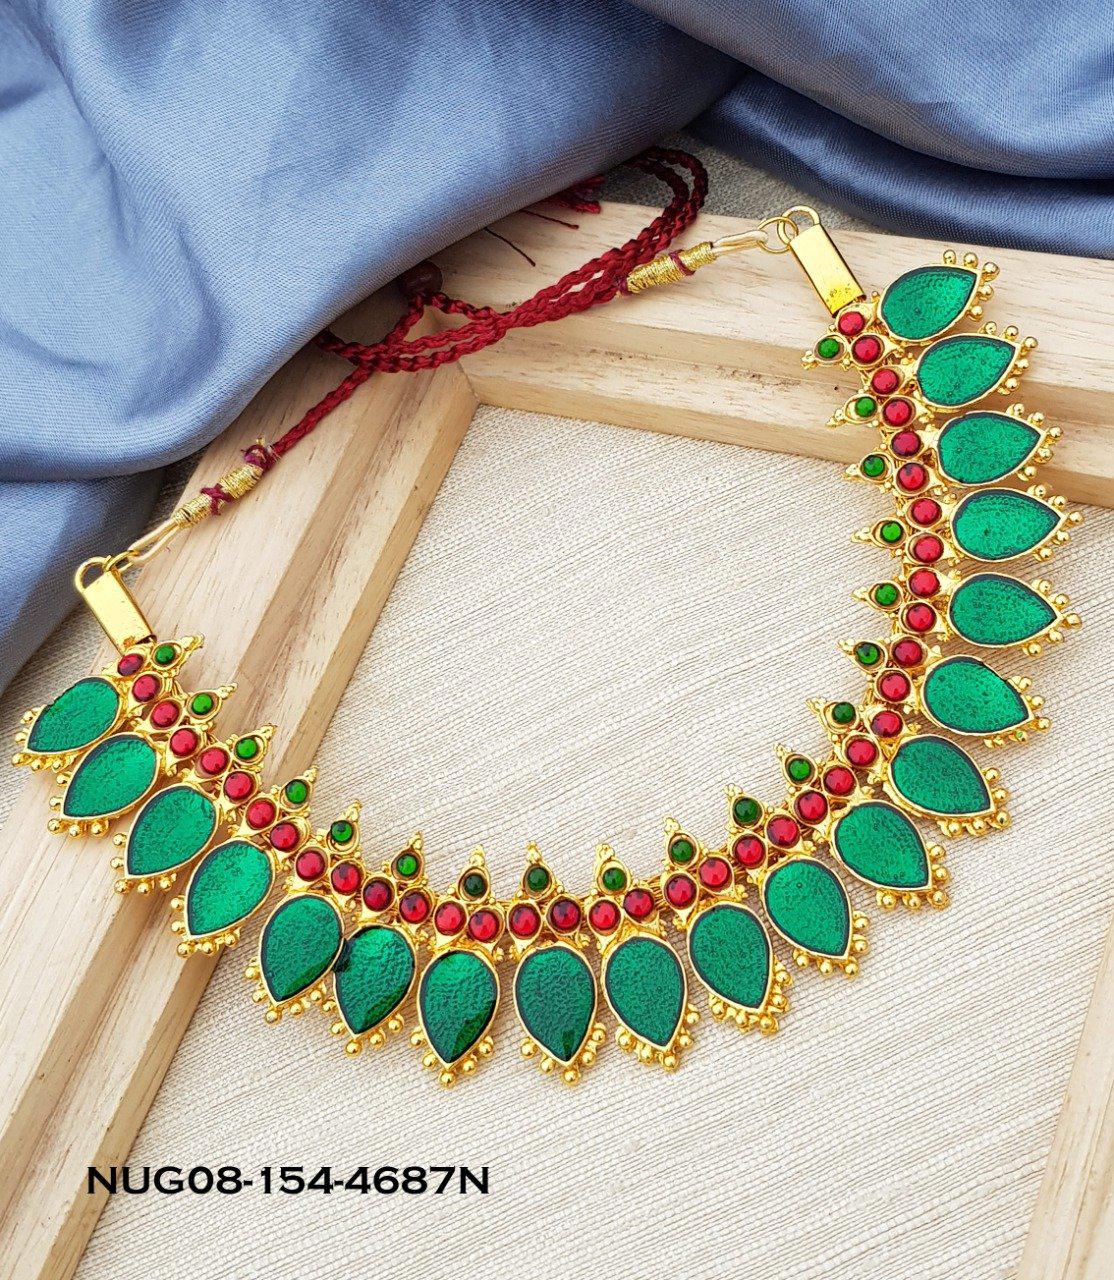 Micro Gold Plated Green Meena nagapadam necklace set suitable for Marriages Bharat Natyam and occasions